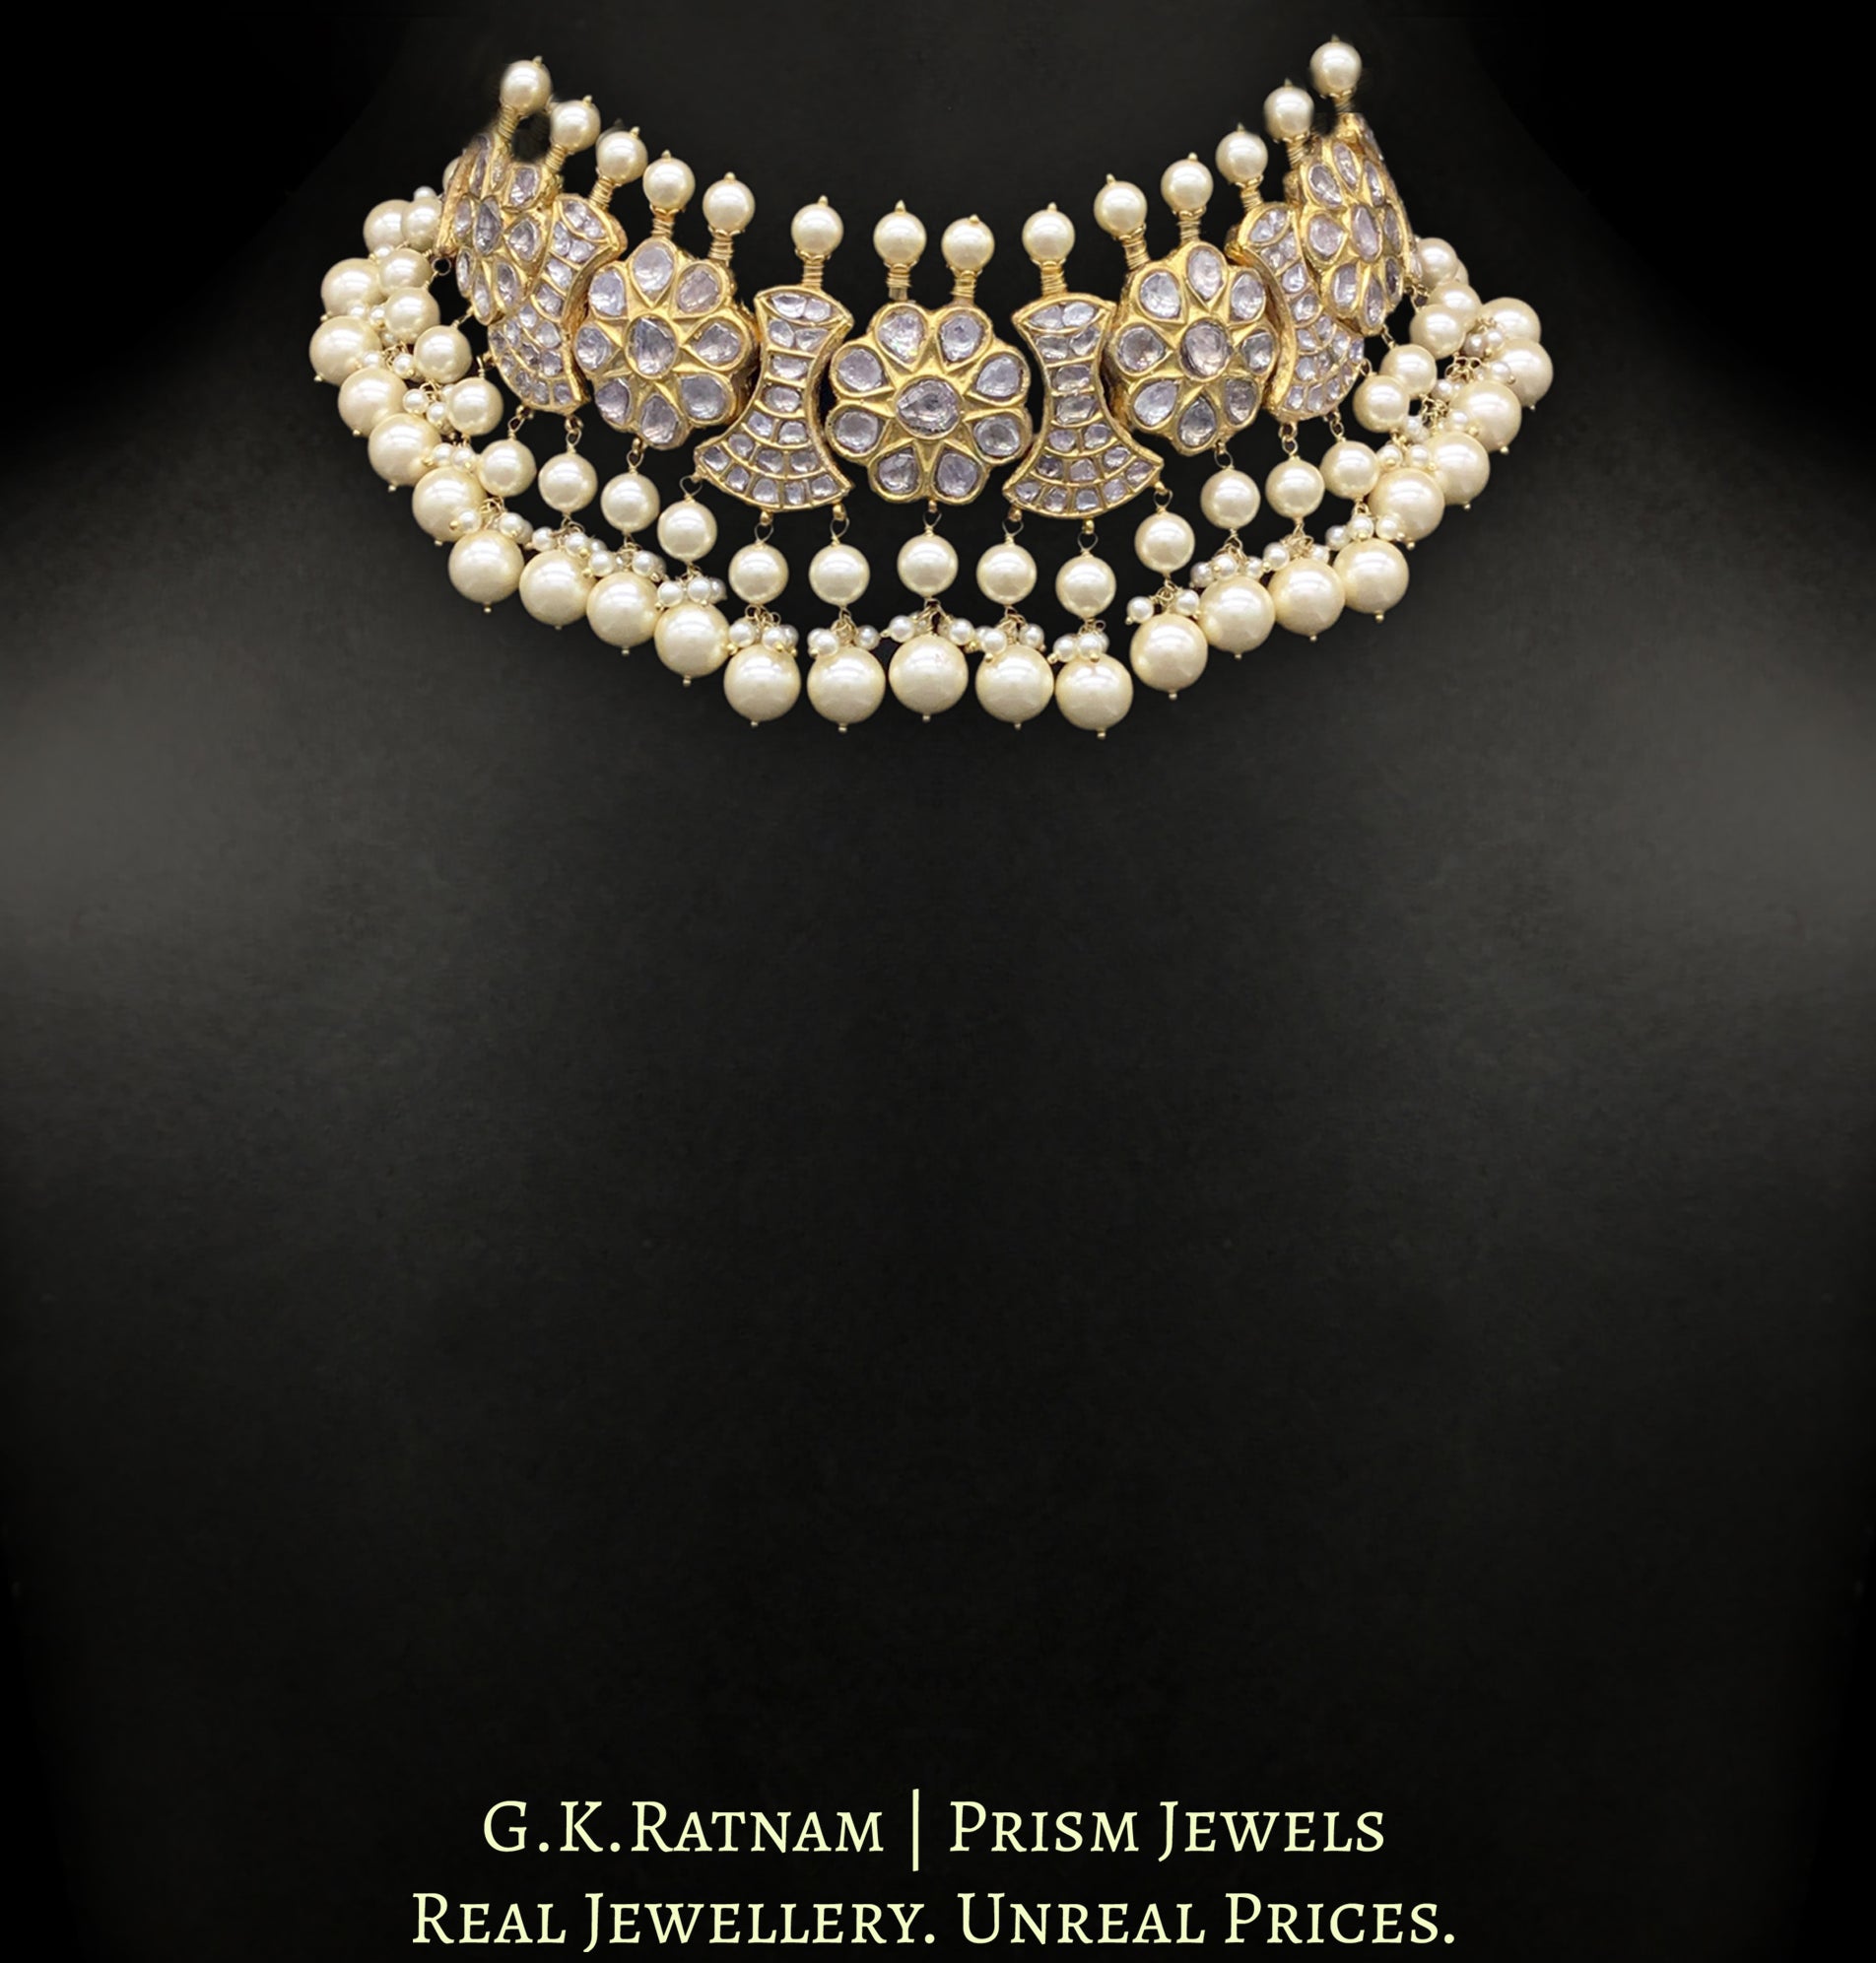 23k Gold and Diamond Polki Choker Necklace Set strung with multiple layers of lustrous pearls